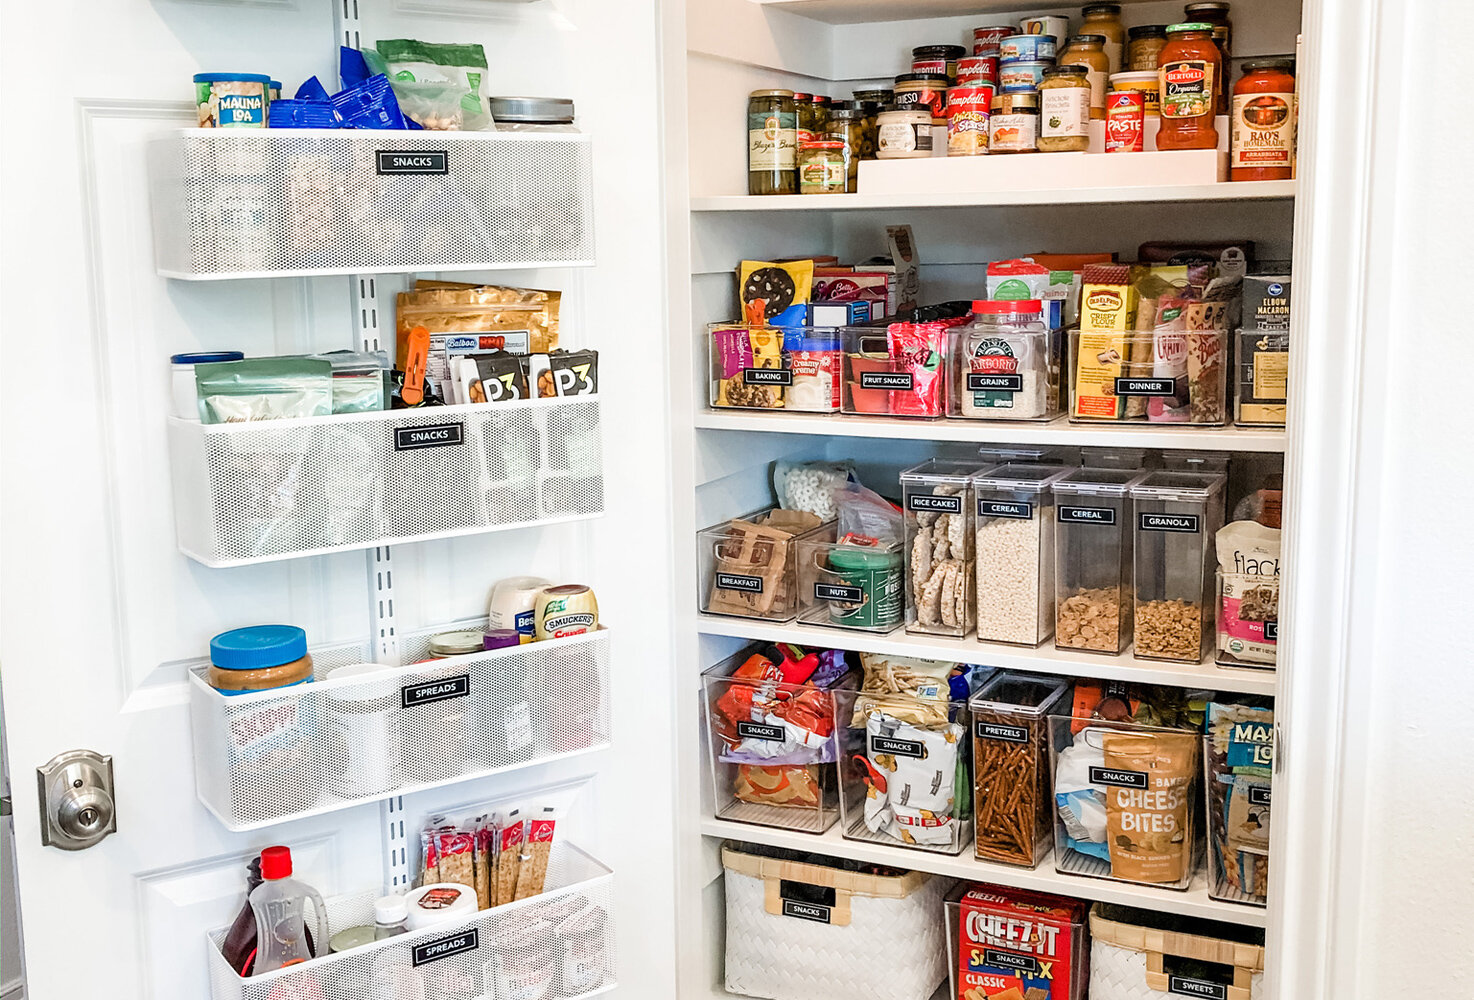 how to organize this DEEP pantry? (difficult to reach the back comfortably)  : r/organization